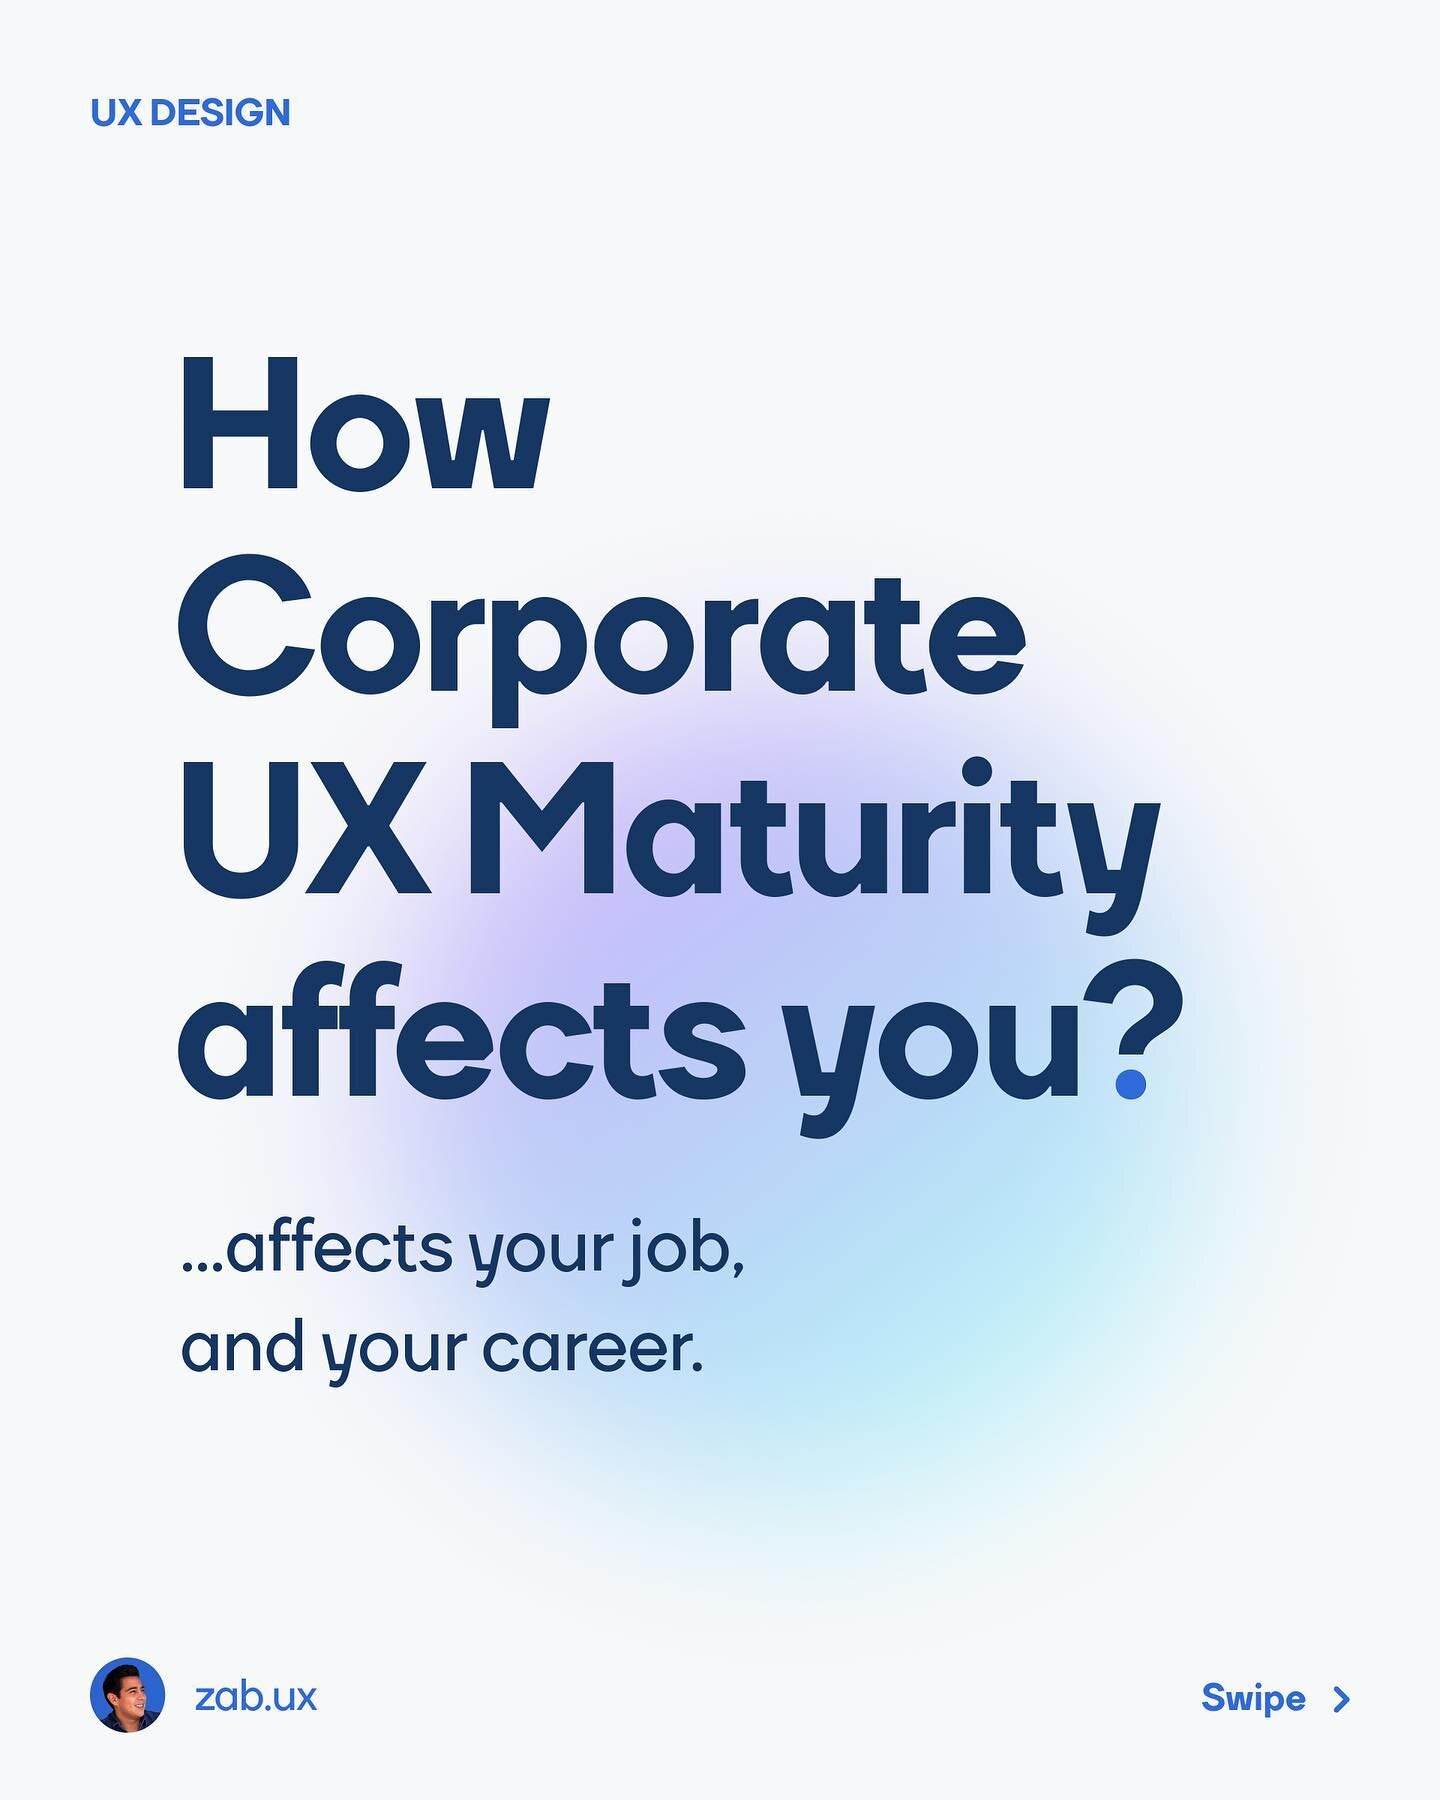 Ux maturity in your company is the reason why you may have a an easier or harder time designing.
.
Many of the &ldquo;problems&rdquo; designers encounter daily, can be closely related to their company&rsquo;s maturity level.
.
If you want more info a